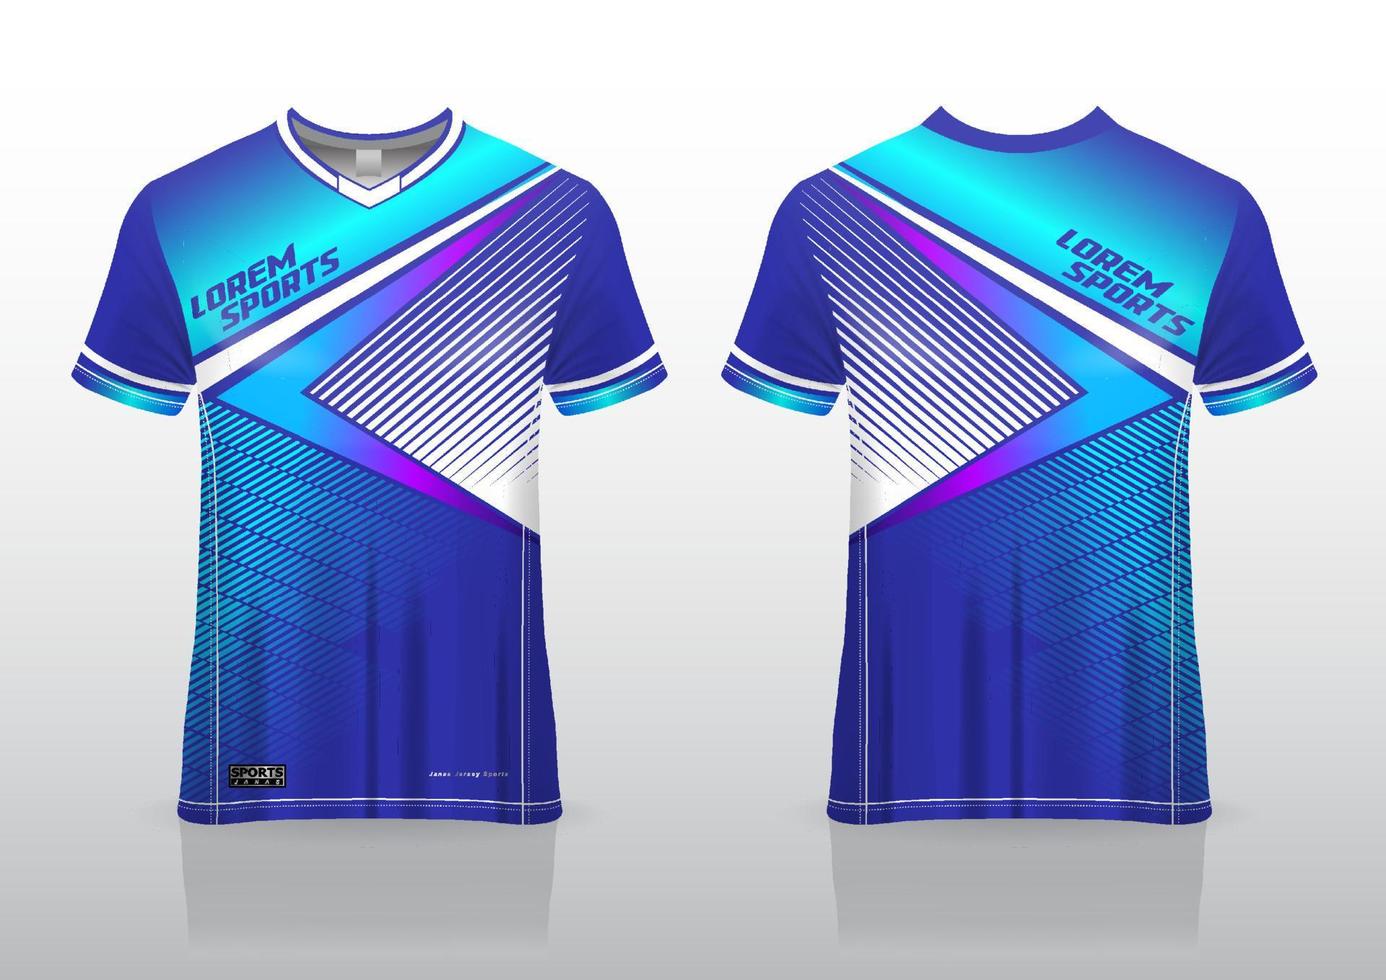 sports jersey design template front and back view vector